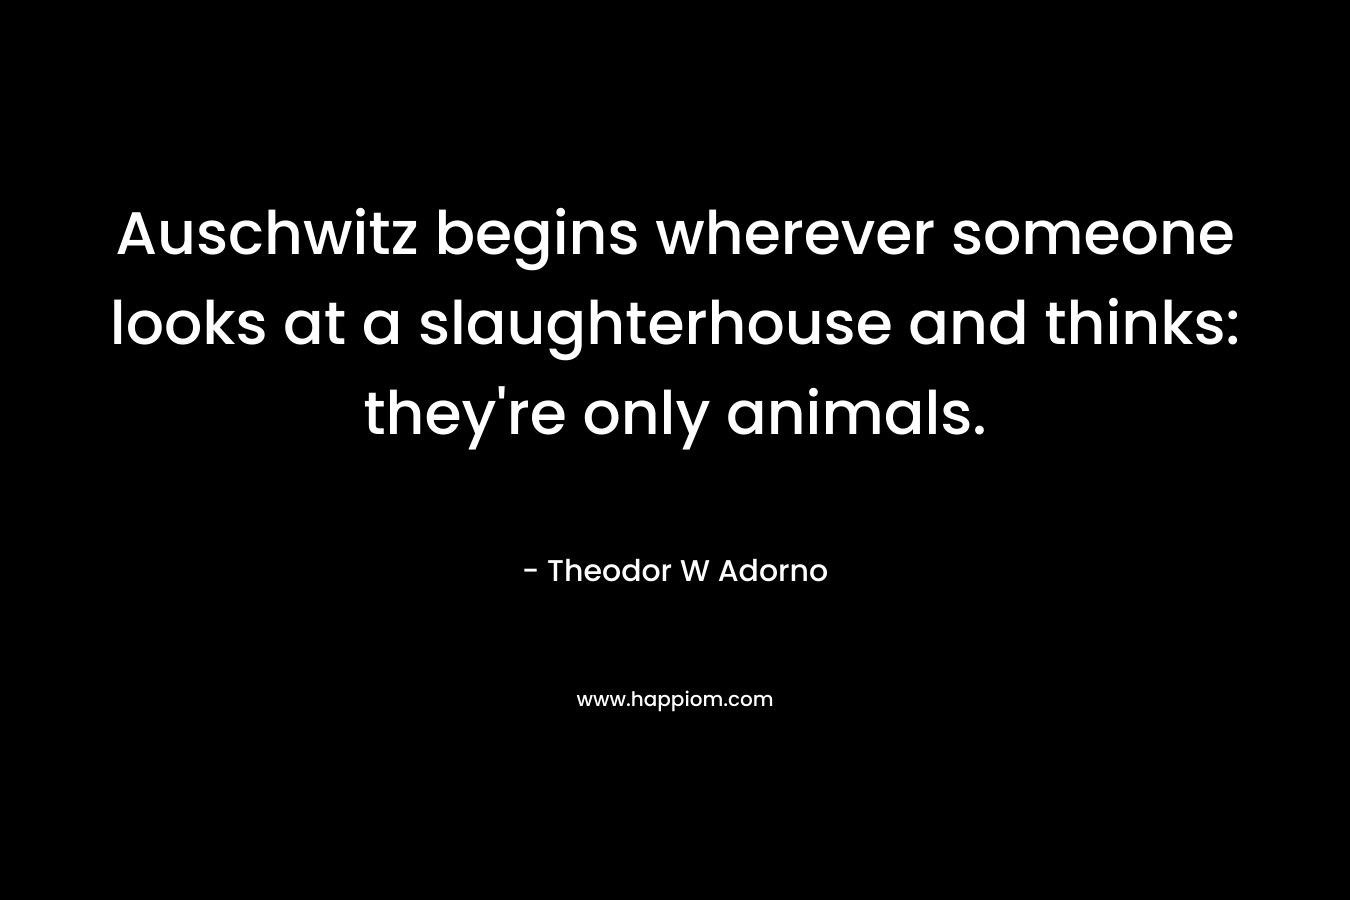 Auschwitz begins wherever someone looks at a slaughterhouse and thinks: they’re only animals. – Theodor W Adorno